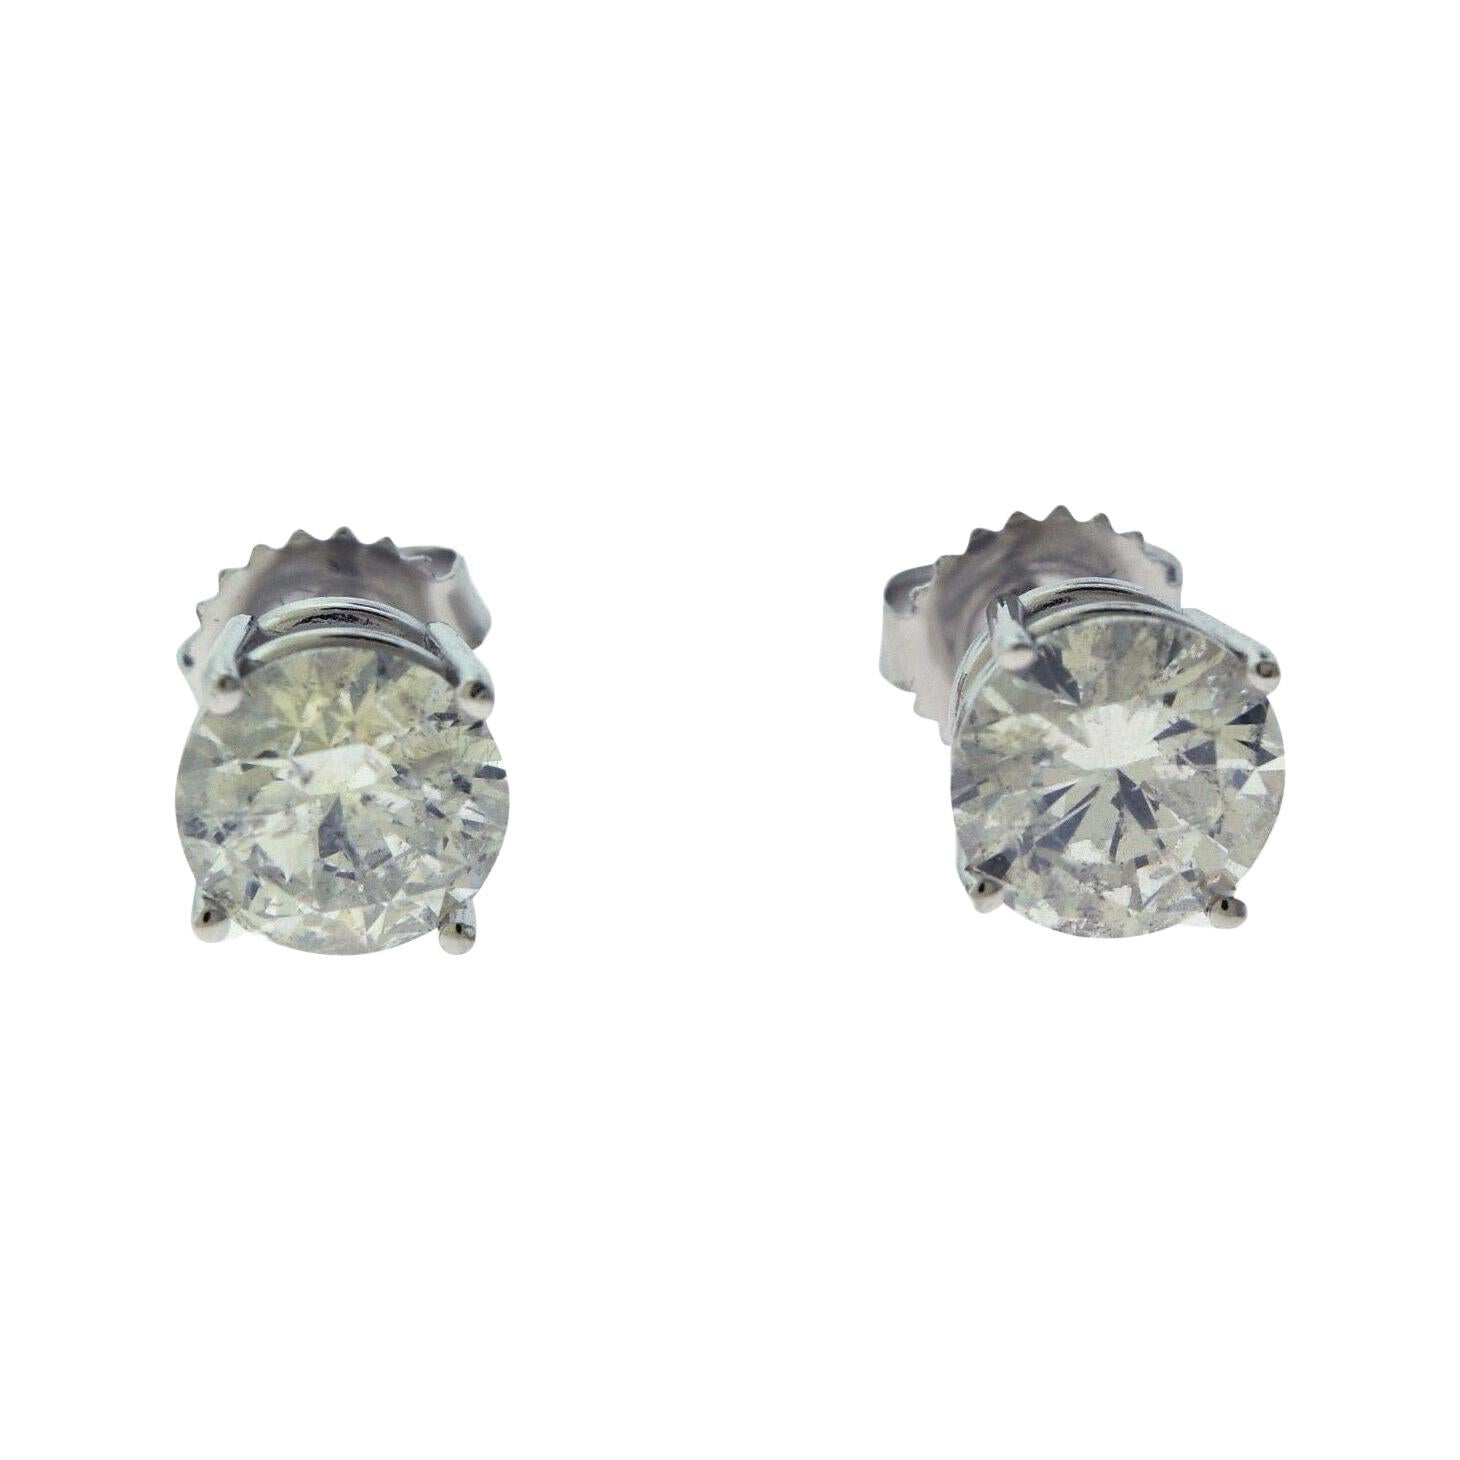 3.05 Total Carat Weight Brilliant Cut Diamond Stud Earrings in White Gold